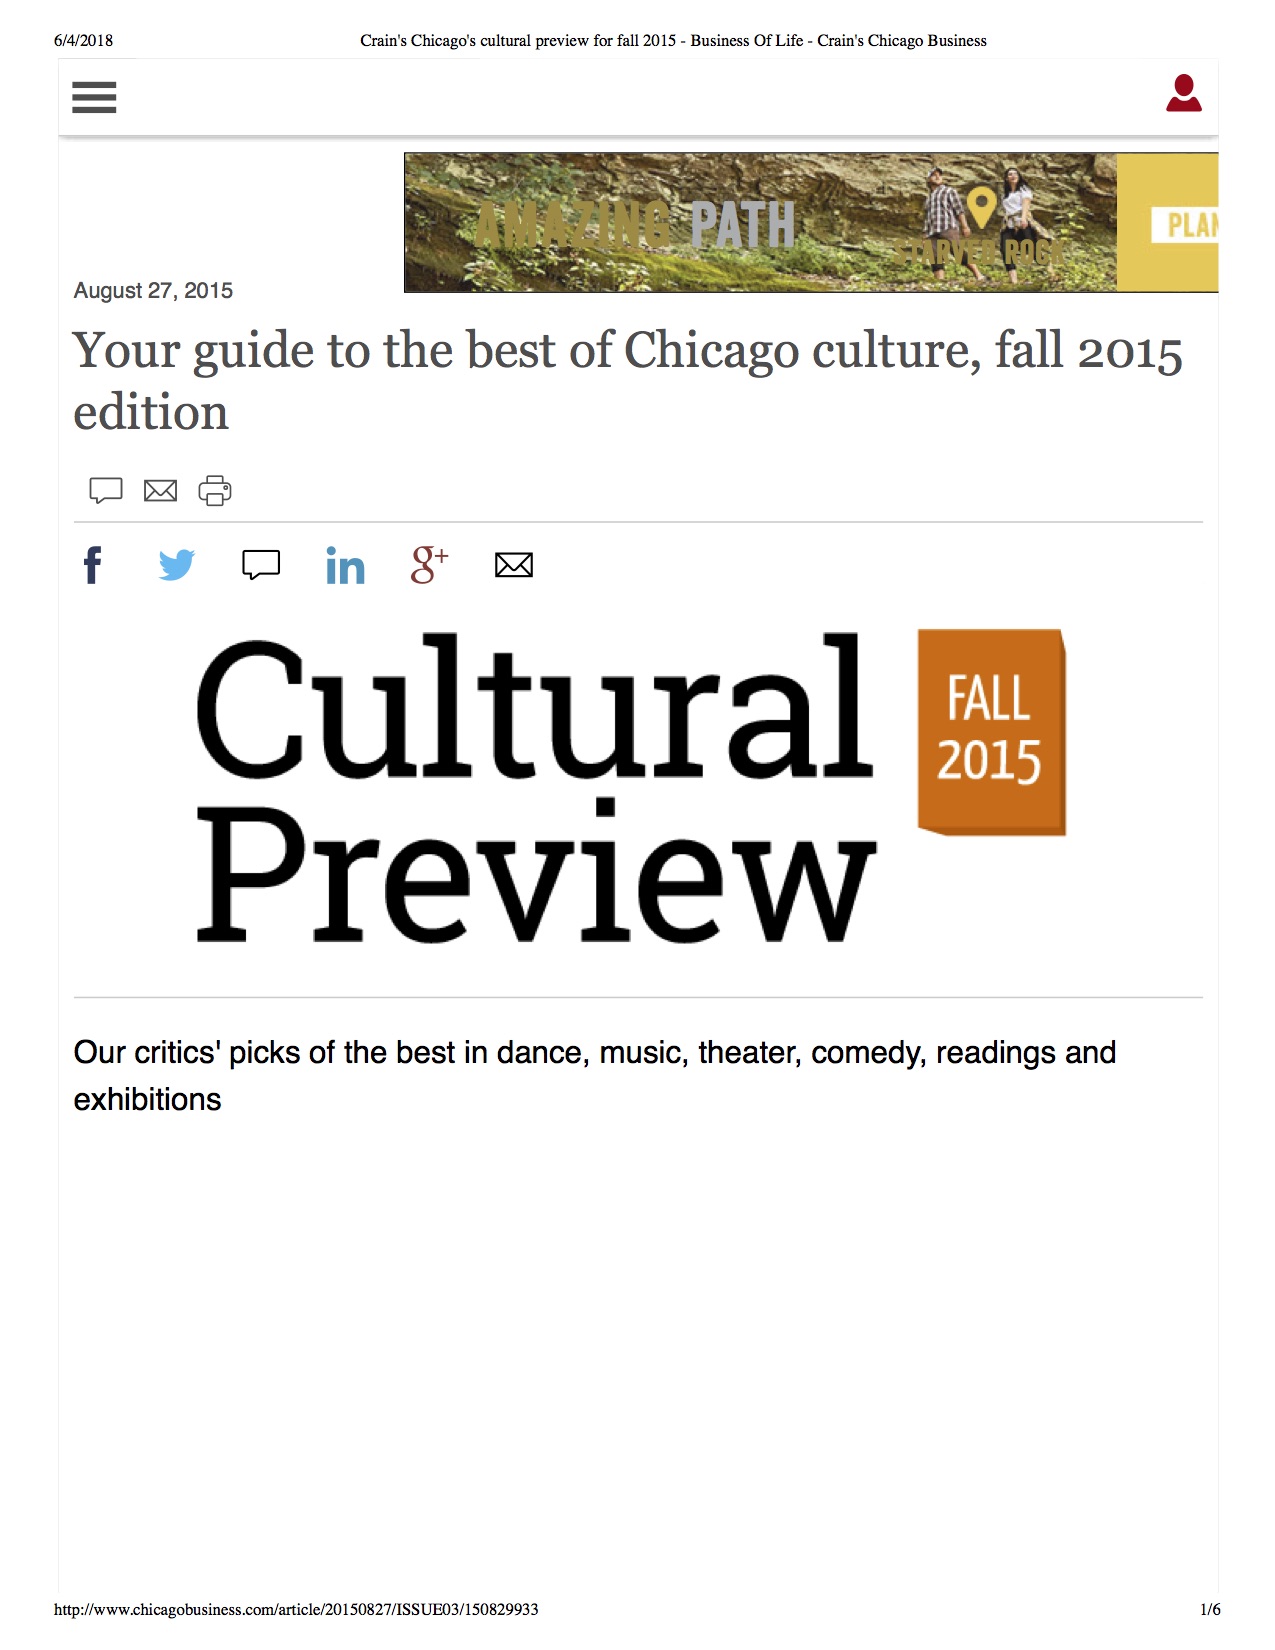 1. Crain's Chicago's cultural preview for fall 2015 - Business Of Life - Crain's Chicago Business.jpg